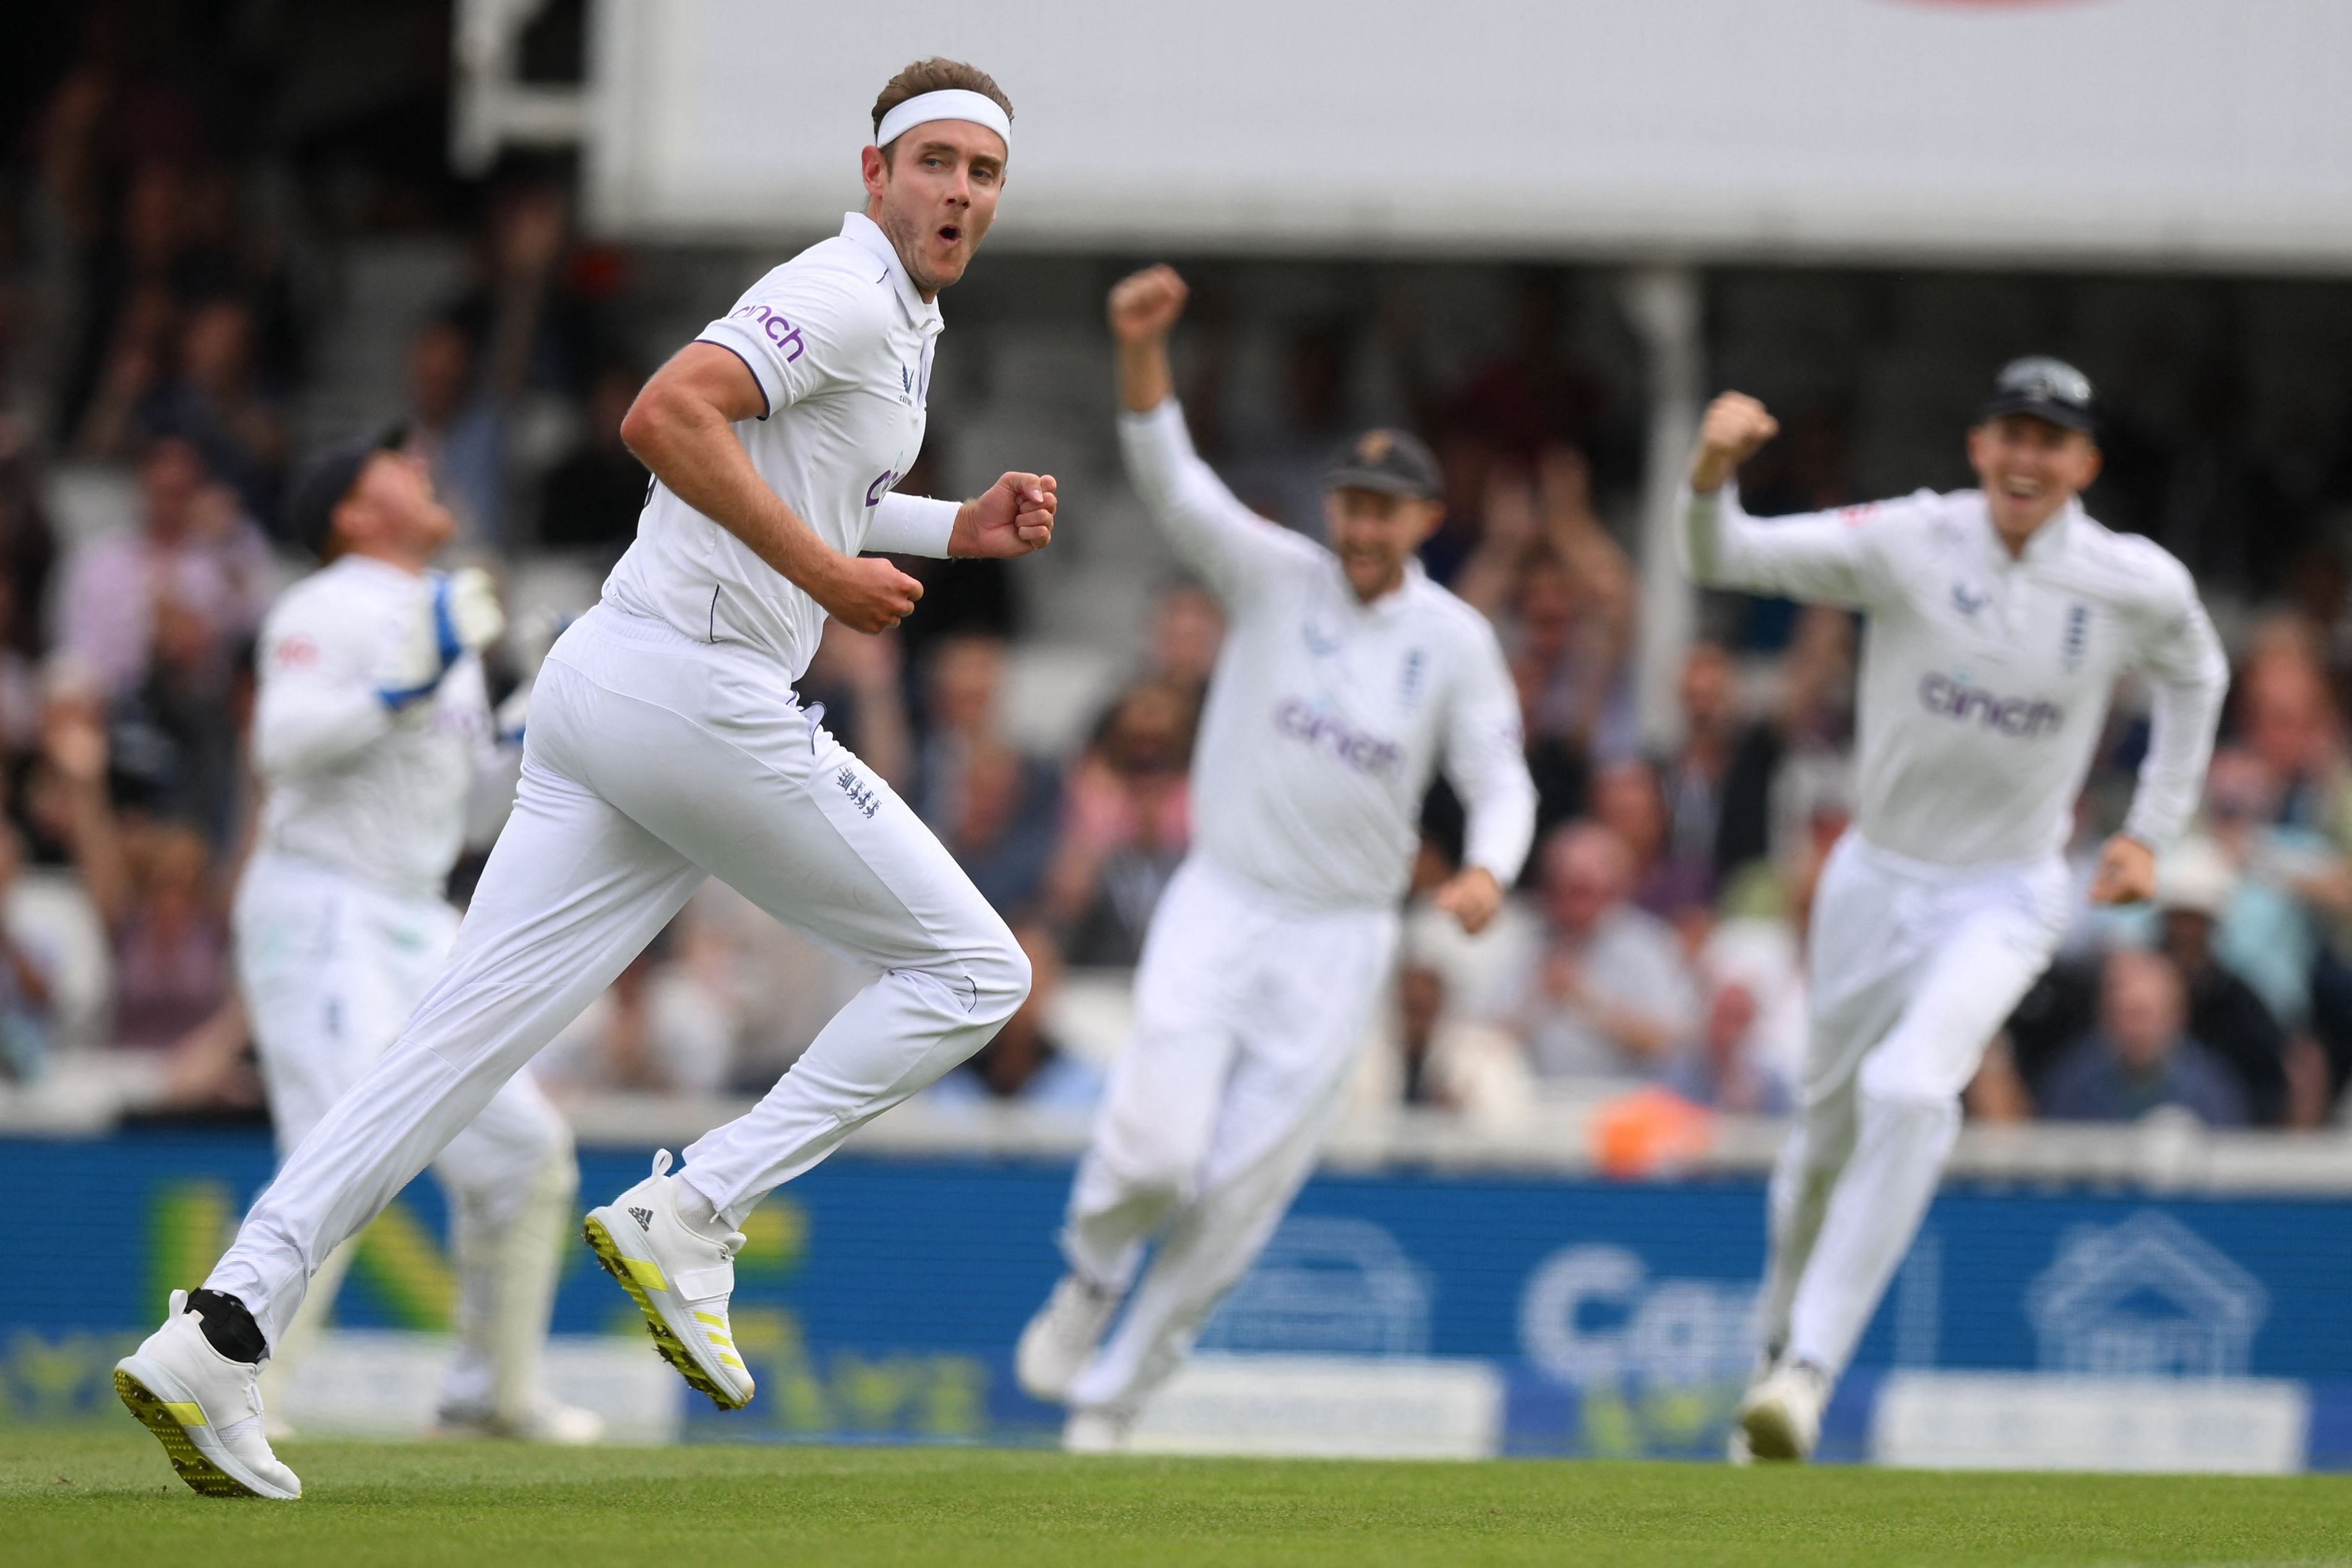 Broad celebrates after taking the wicket of Australia's Travis Head on day two